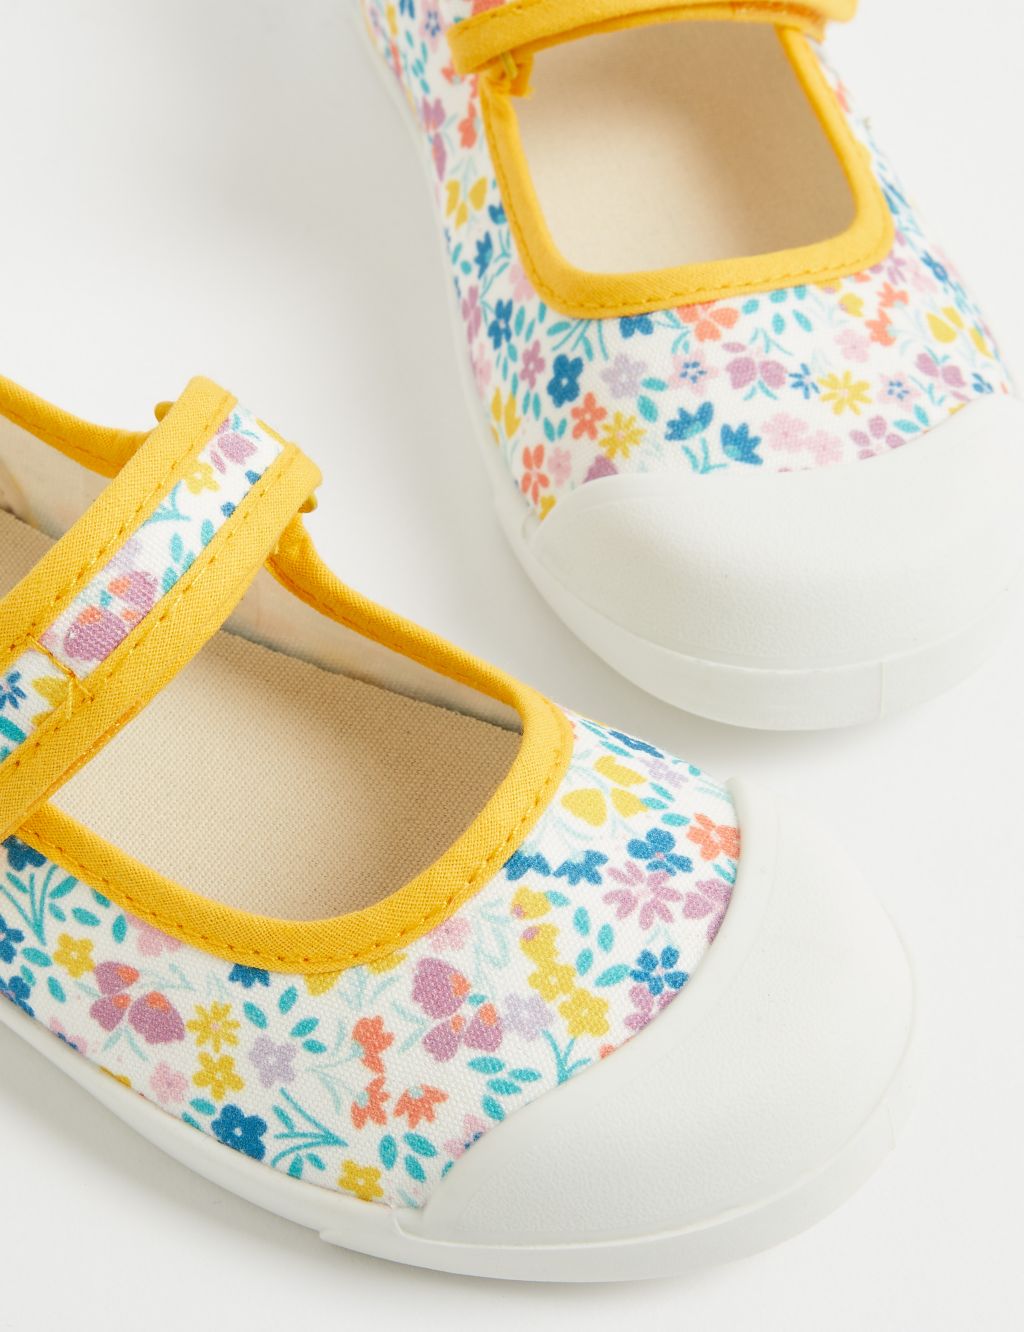 Kids' Floral Mary Jane Pumps (4 Small - 2 Large) image 2